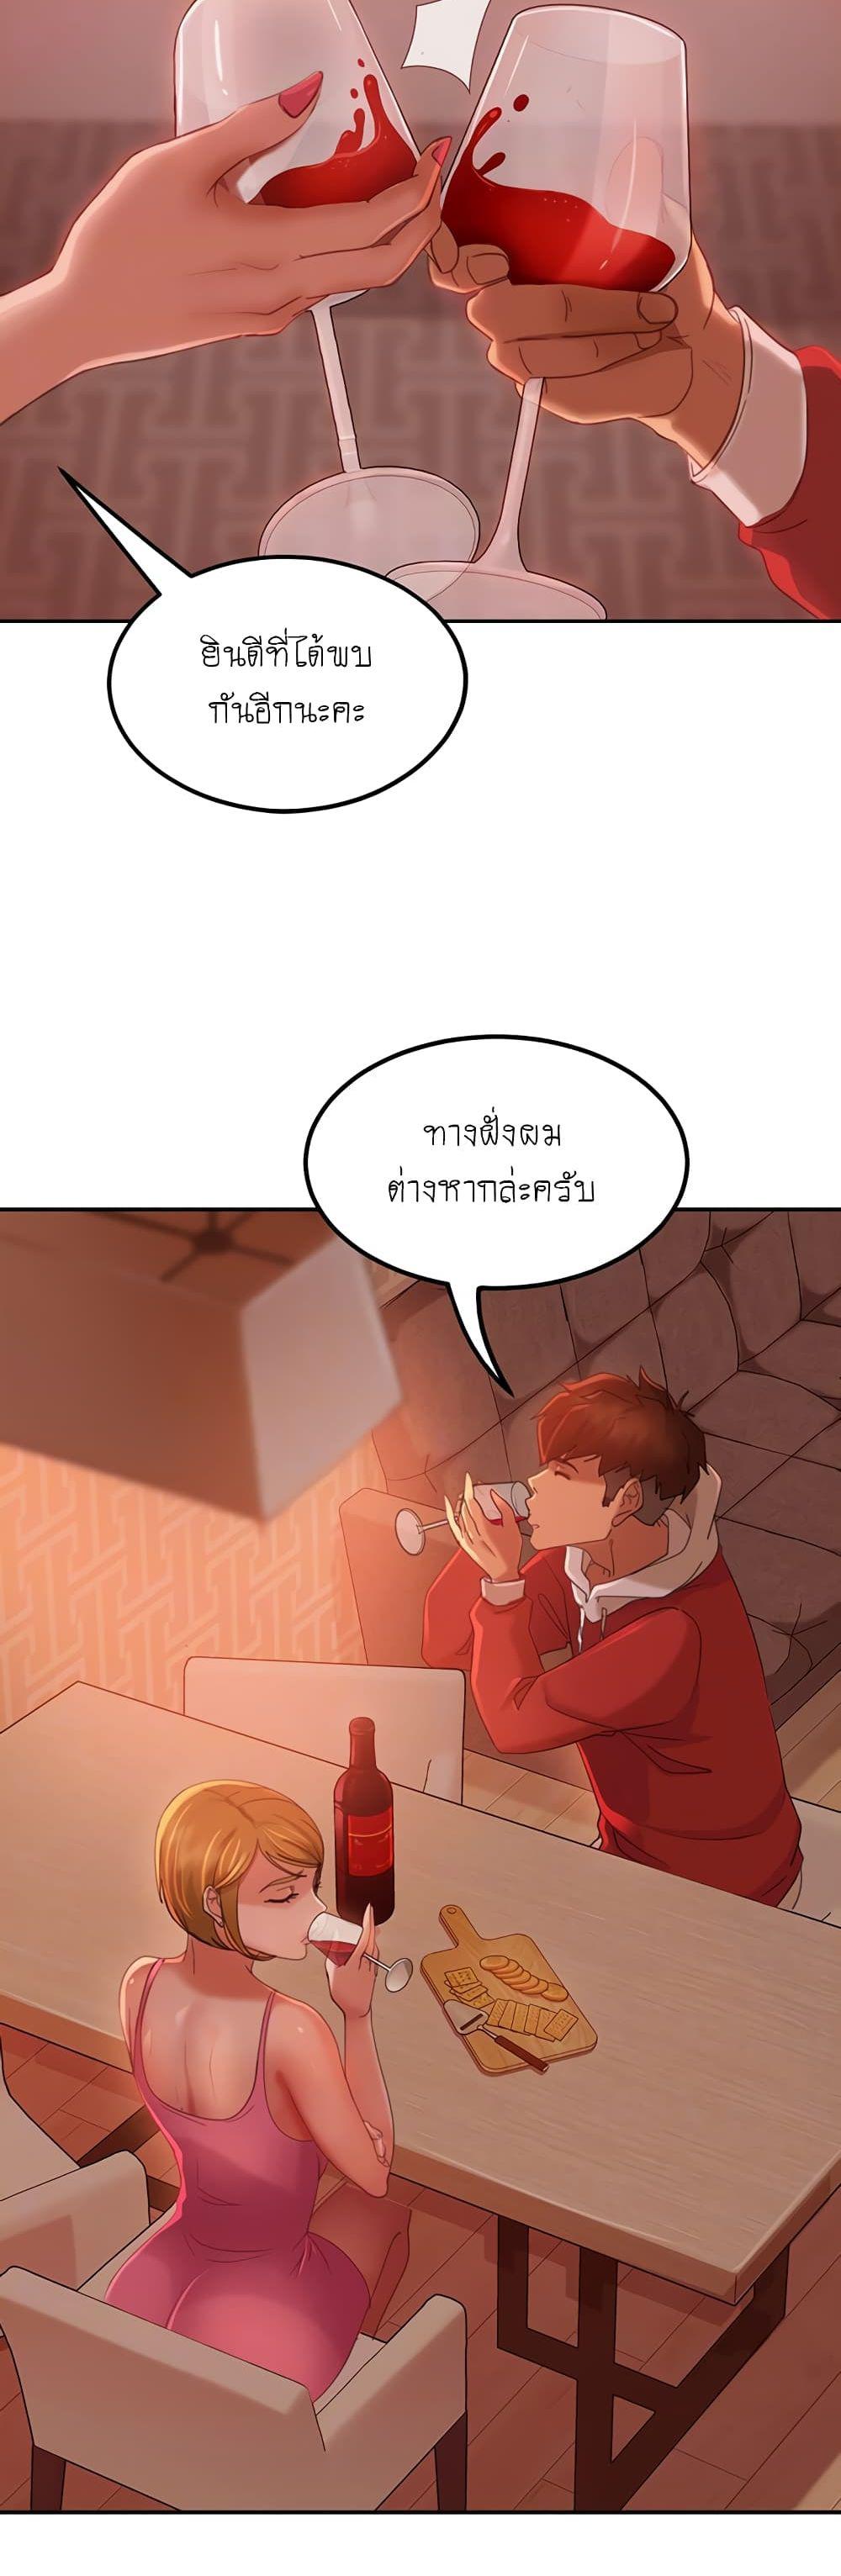 A Twisted Day 4 ภาพ 8